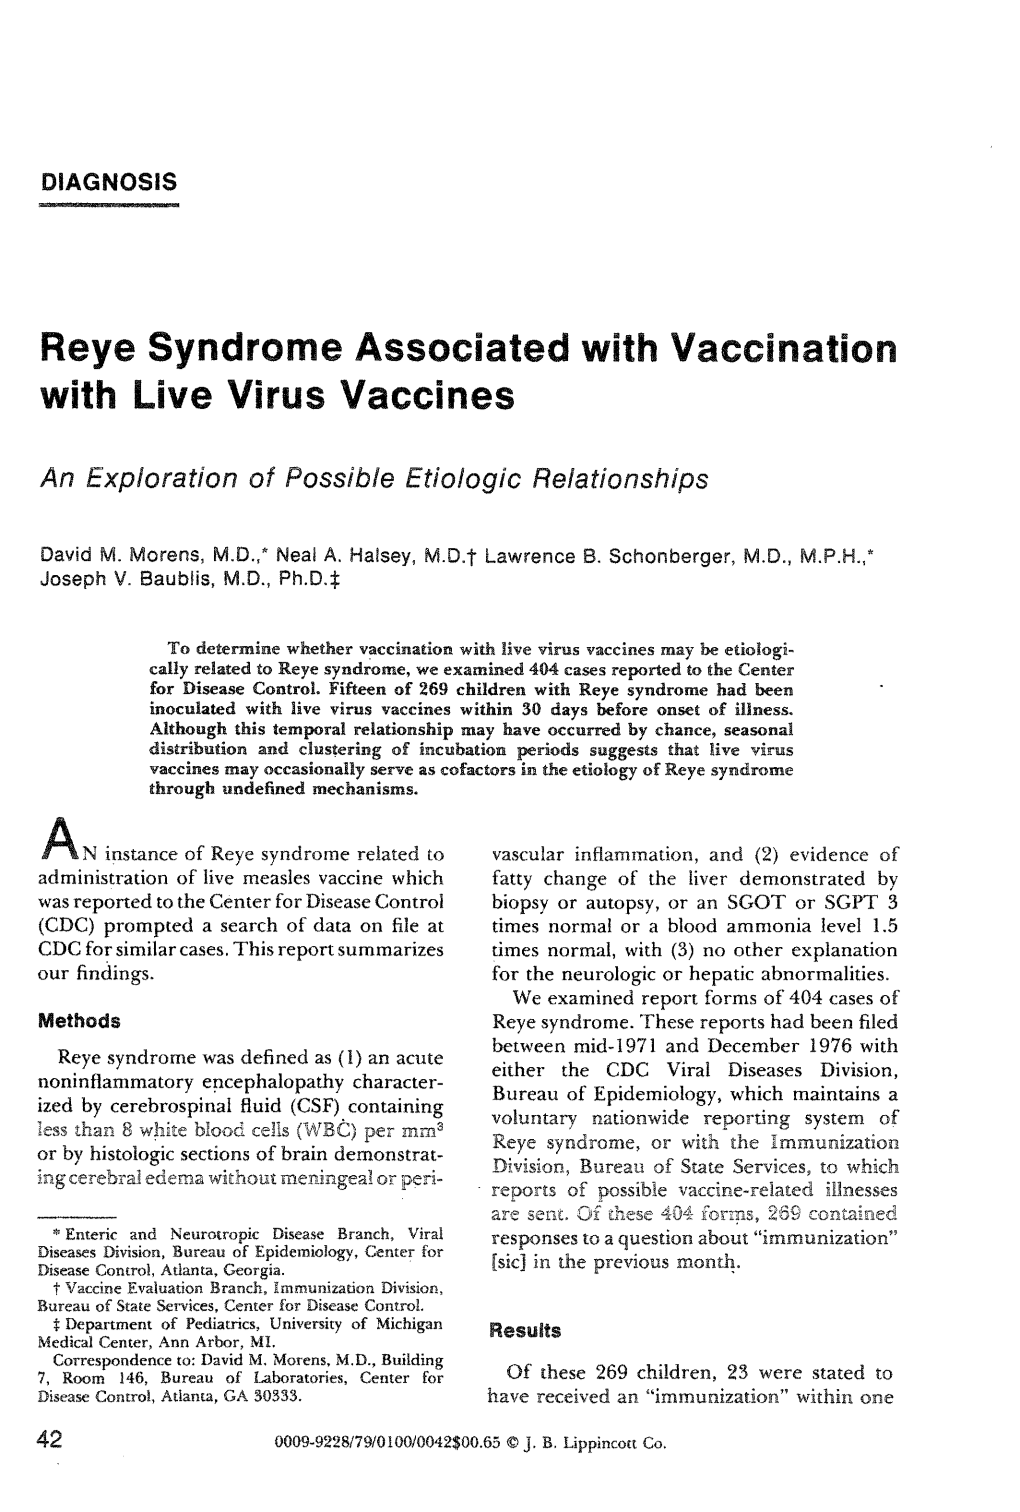 Reye Syndrome Associated with Vaccination with Live Virus Vaccines